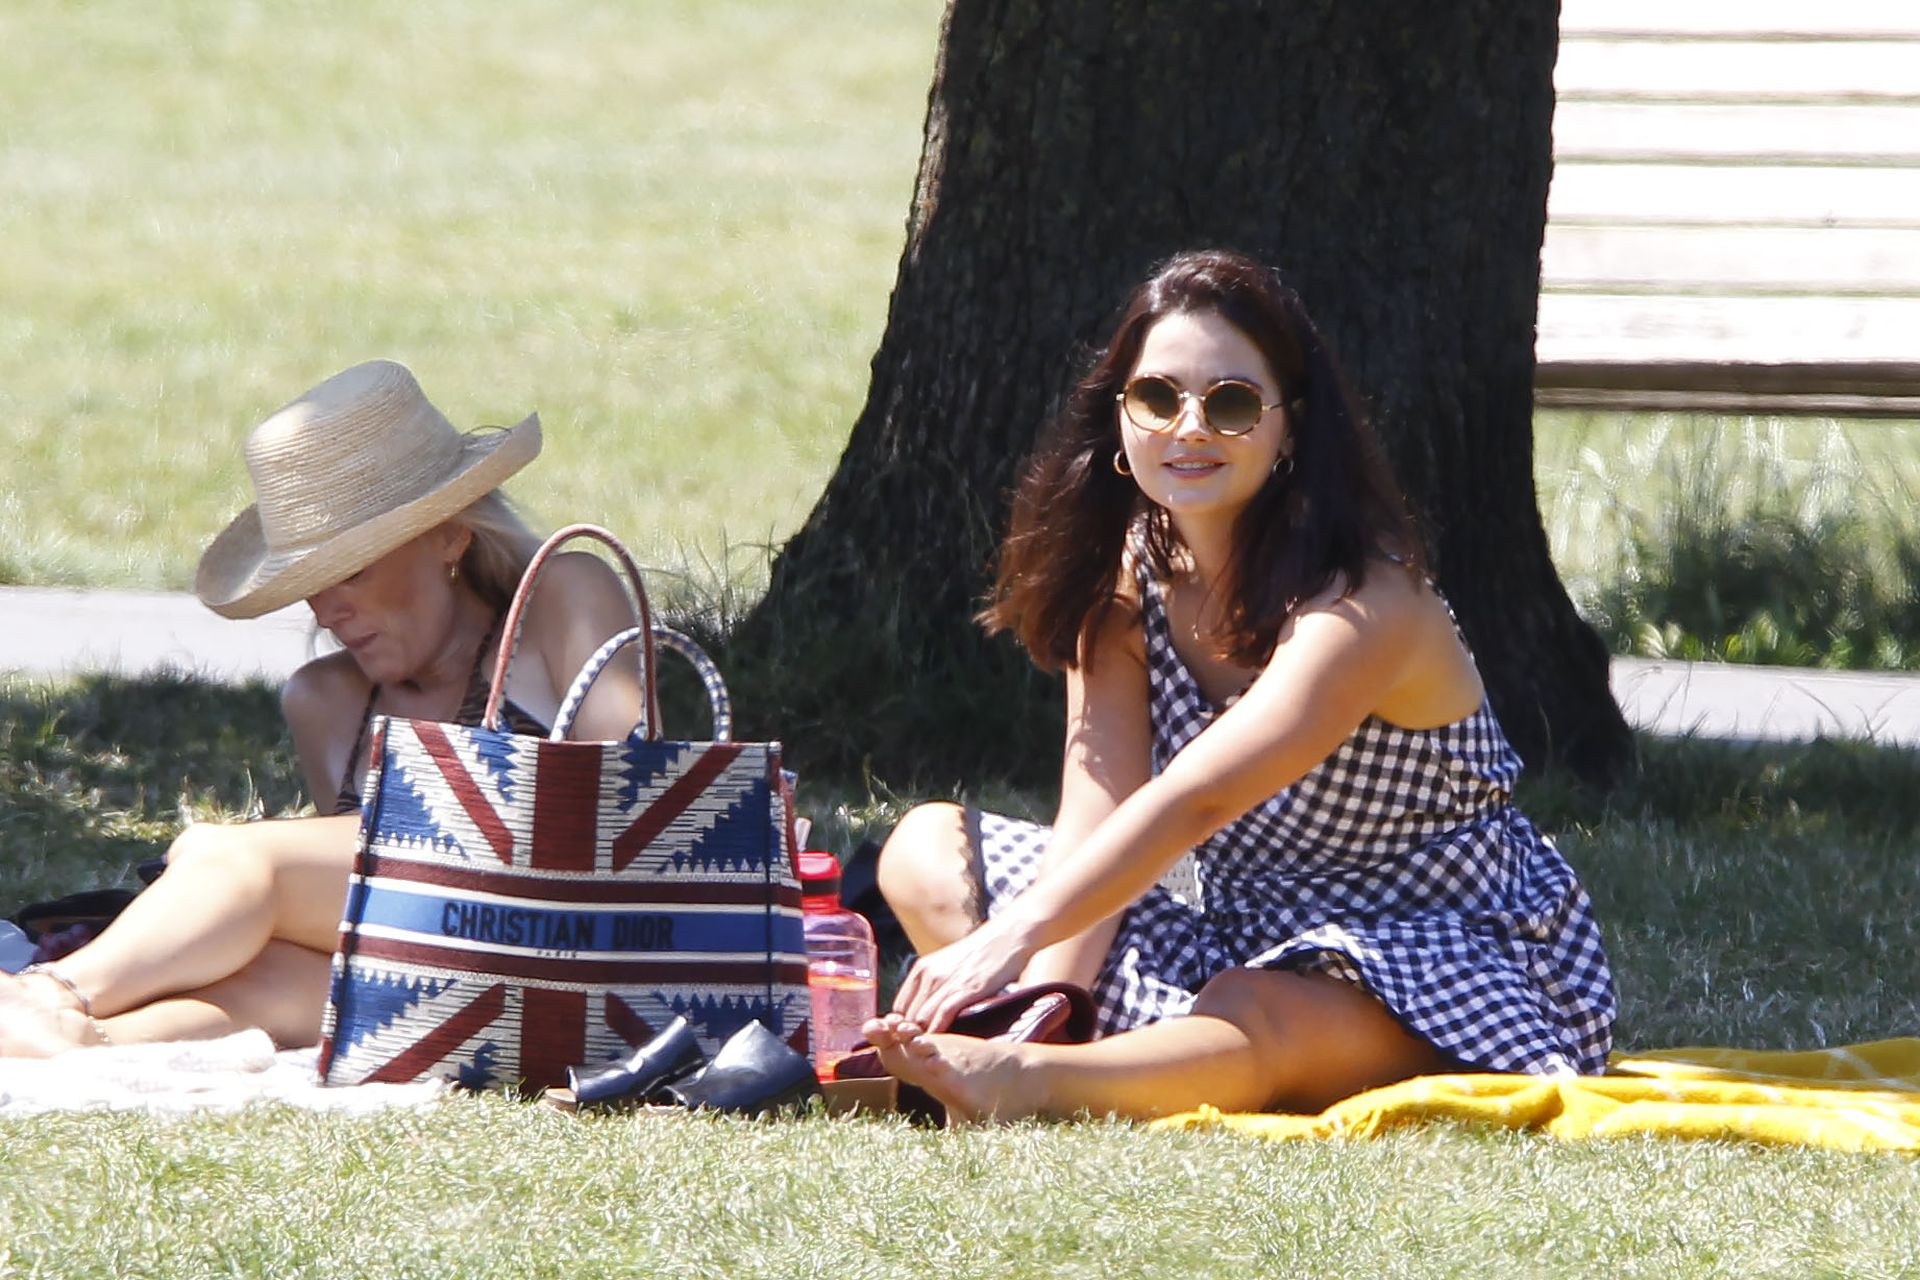 Jenna Coleman Is Spotted At a London Park With a Friend (49 Photos)